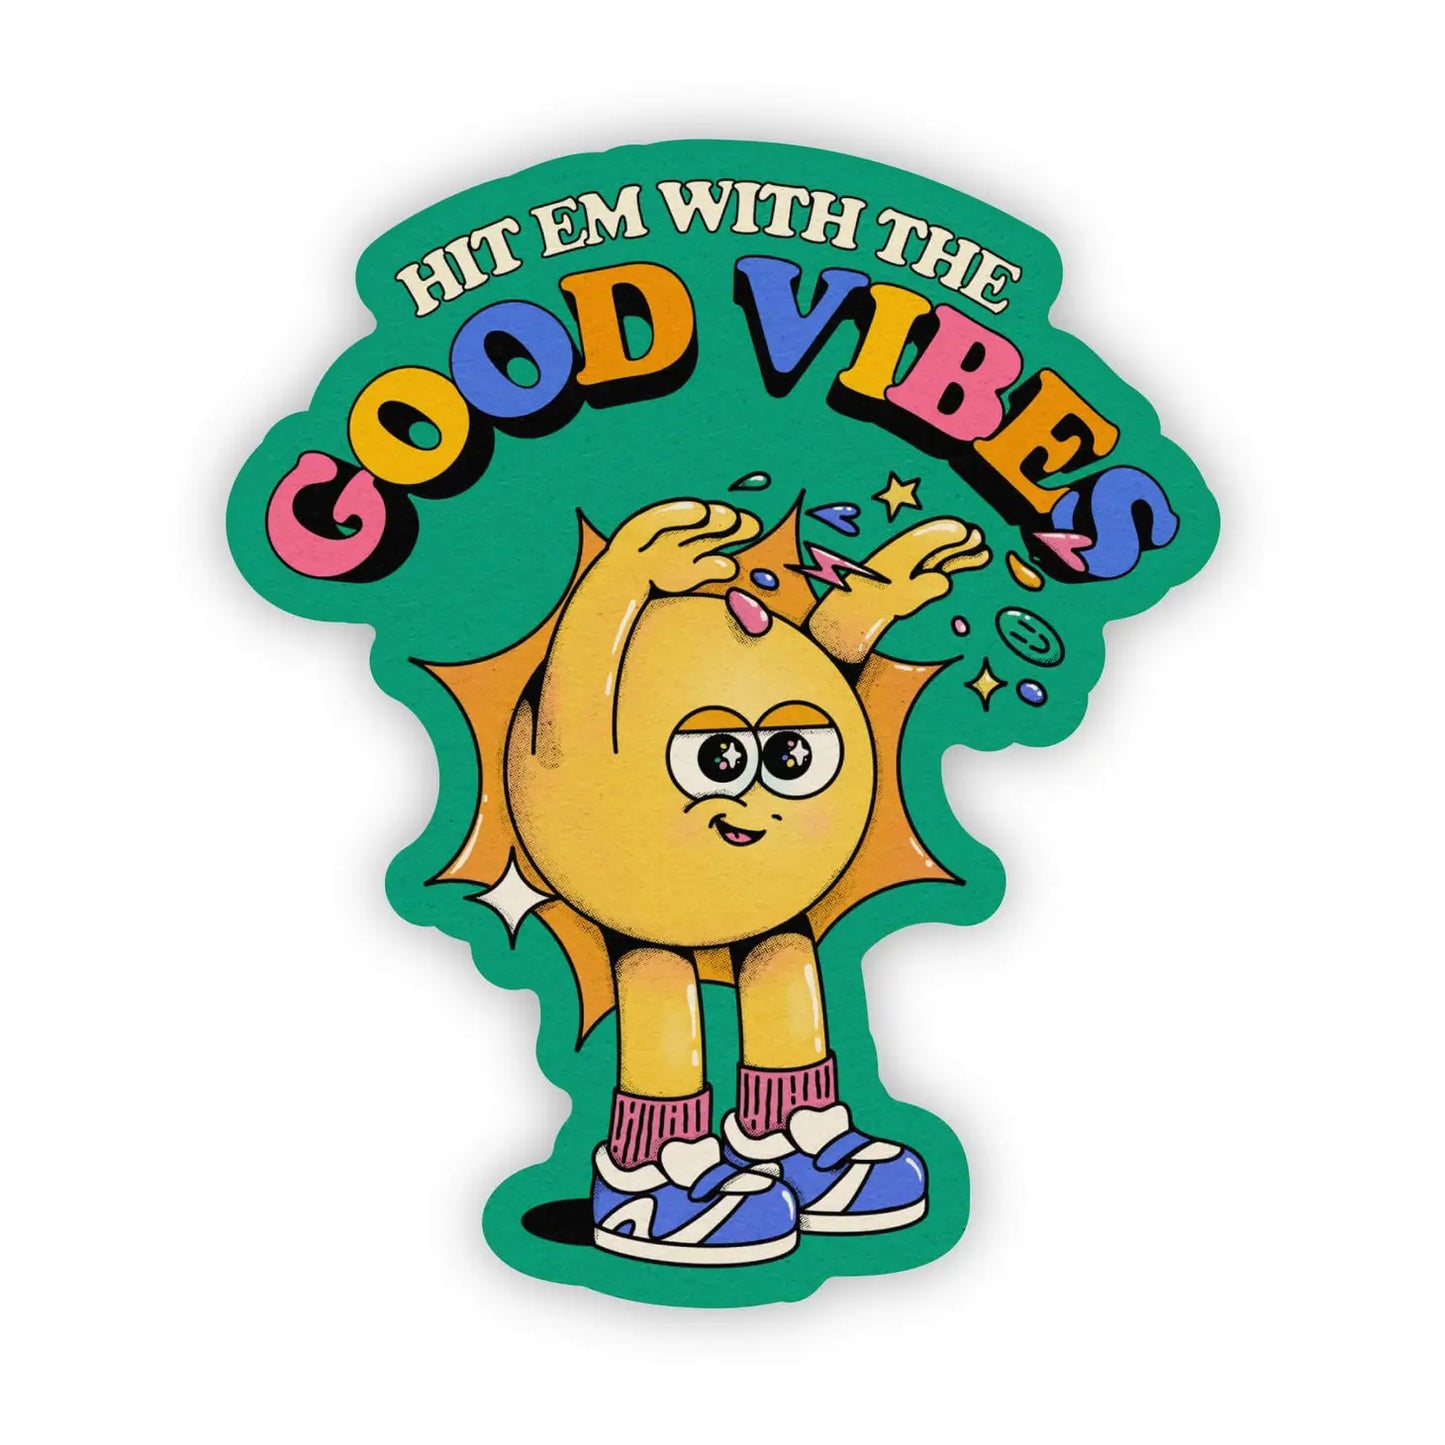 Hit Em with the Good Vibes Sticker